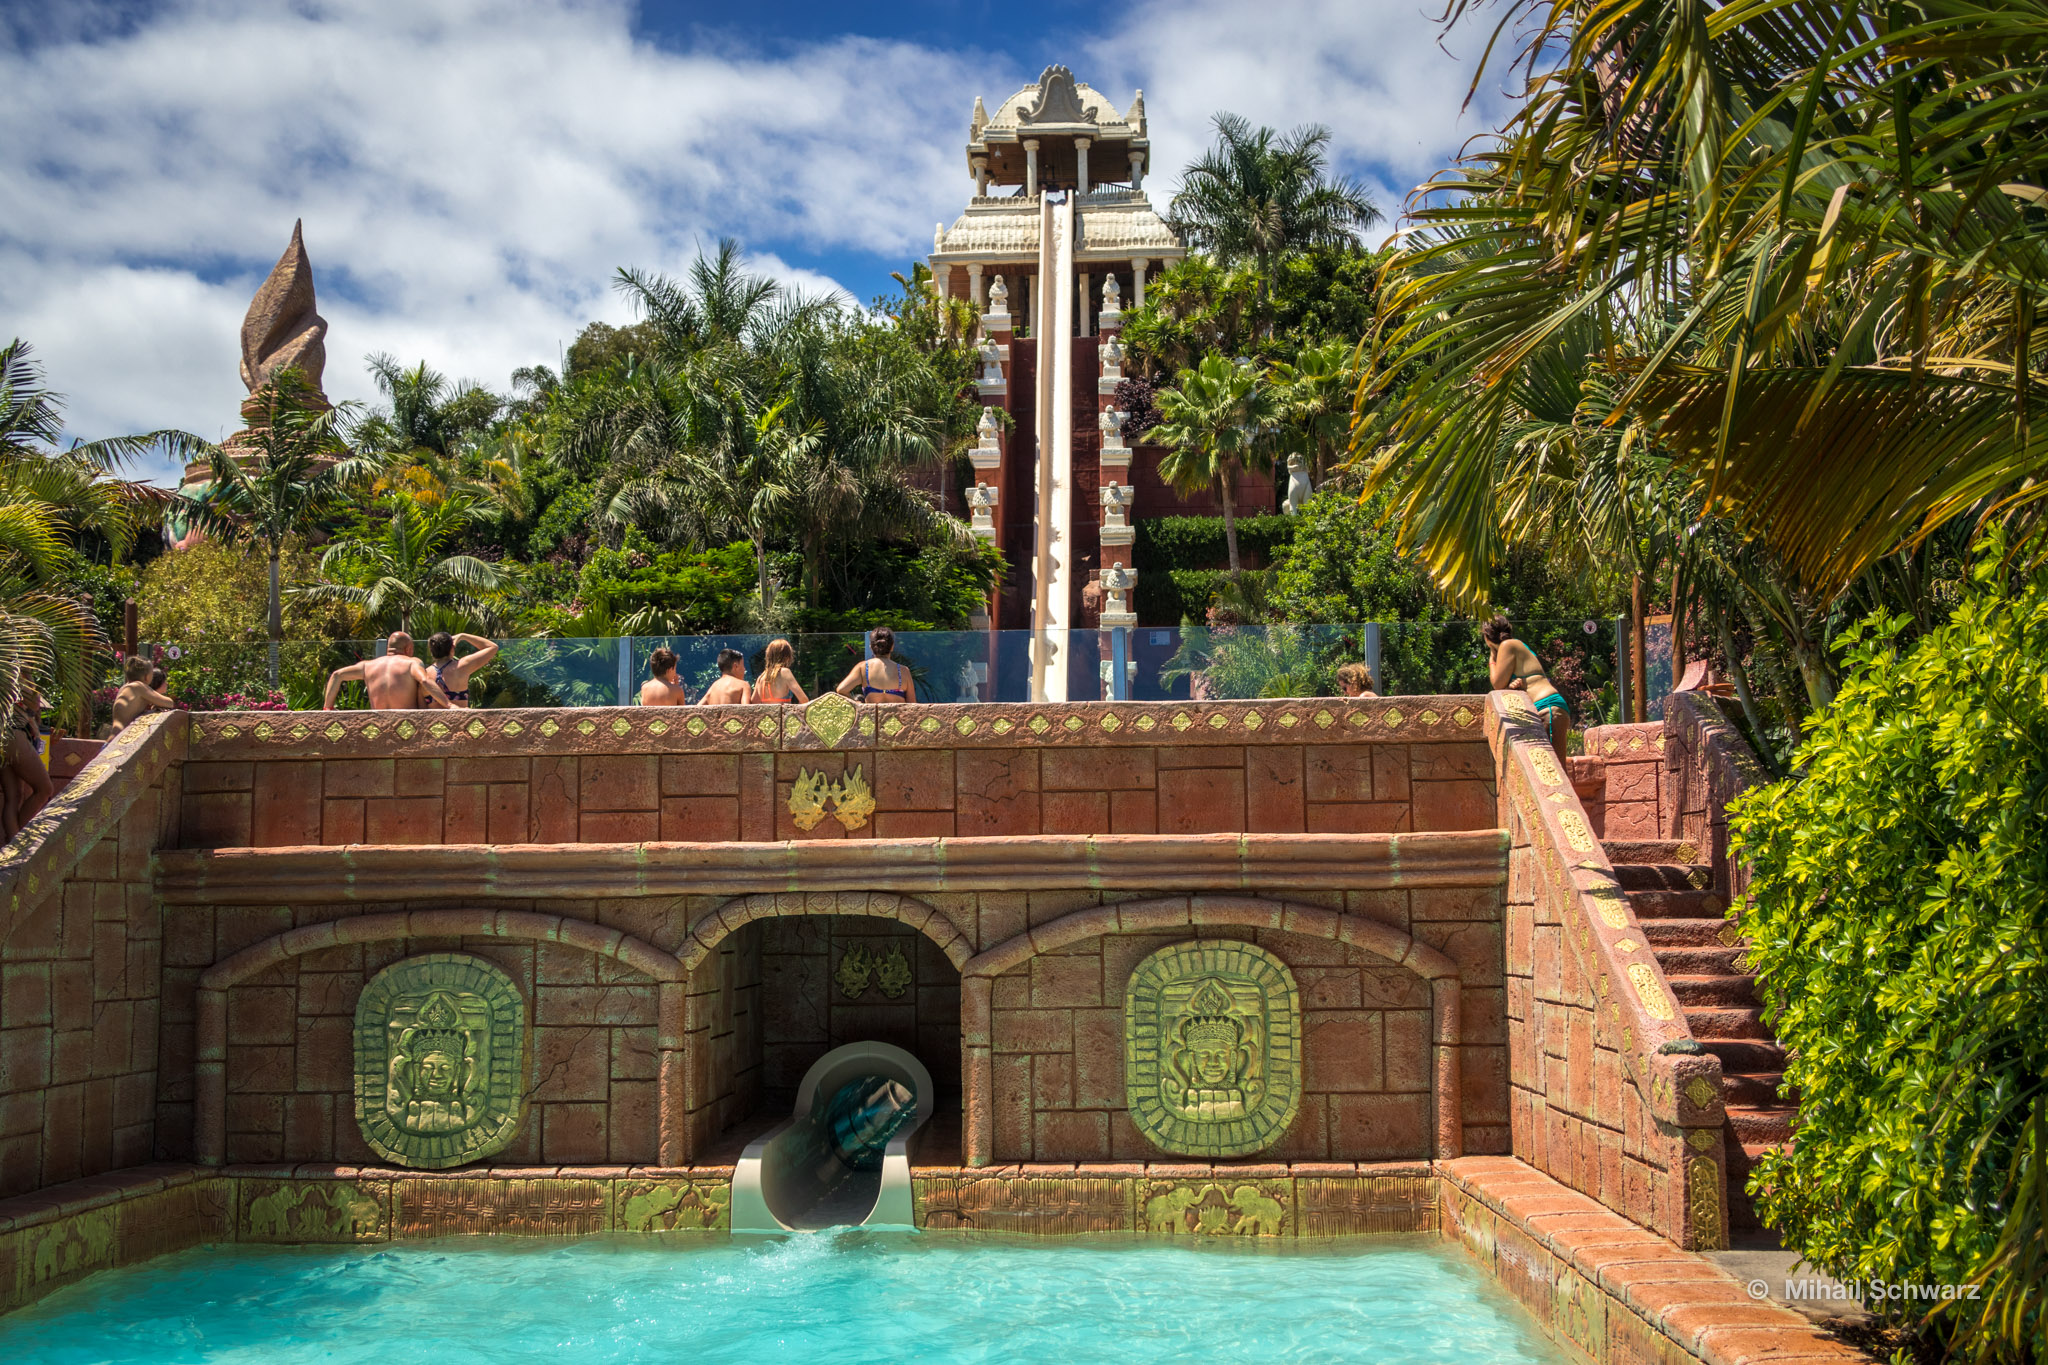 What’s So Special About Siam Park in Tenerife?